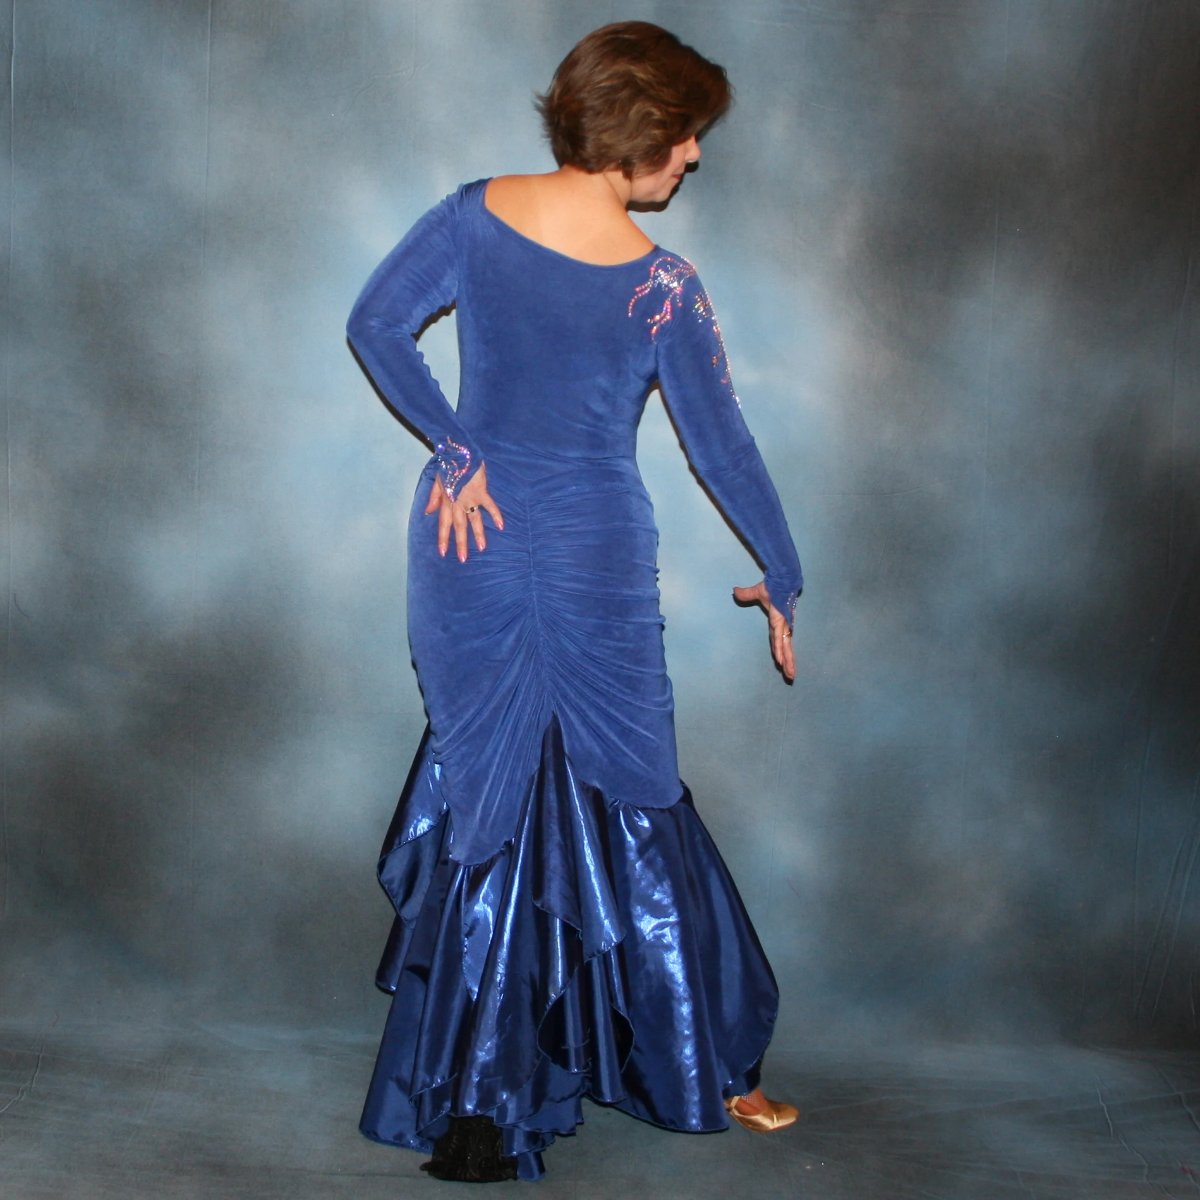 Crystal's Creations back view of Blue tango/ballroom dress created in sea blue luxurious solid slinky & iridescent shades of blue print chiffon is a converta ballroom dress